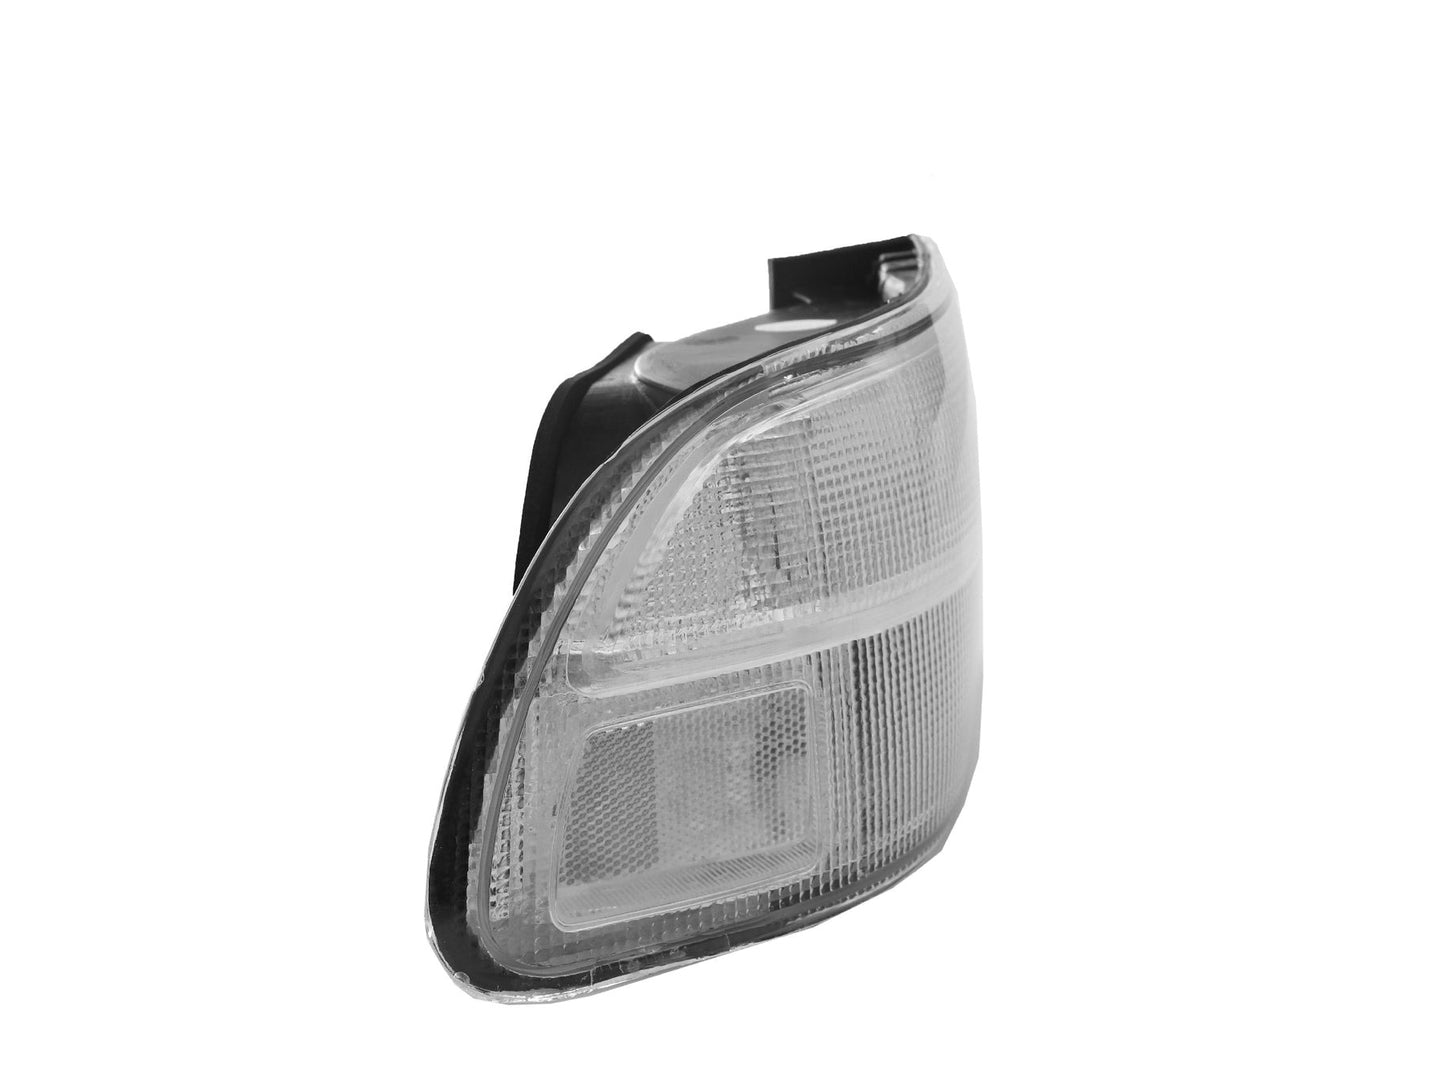 1992-1995 Honda Civic 2D Coupe / 4D Sedan JDM EG Style All Clear 3PC Tail Lights - Made by Unique Style Racing